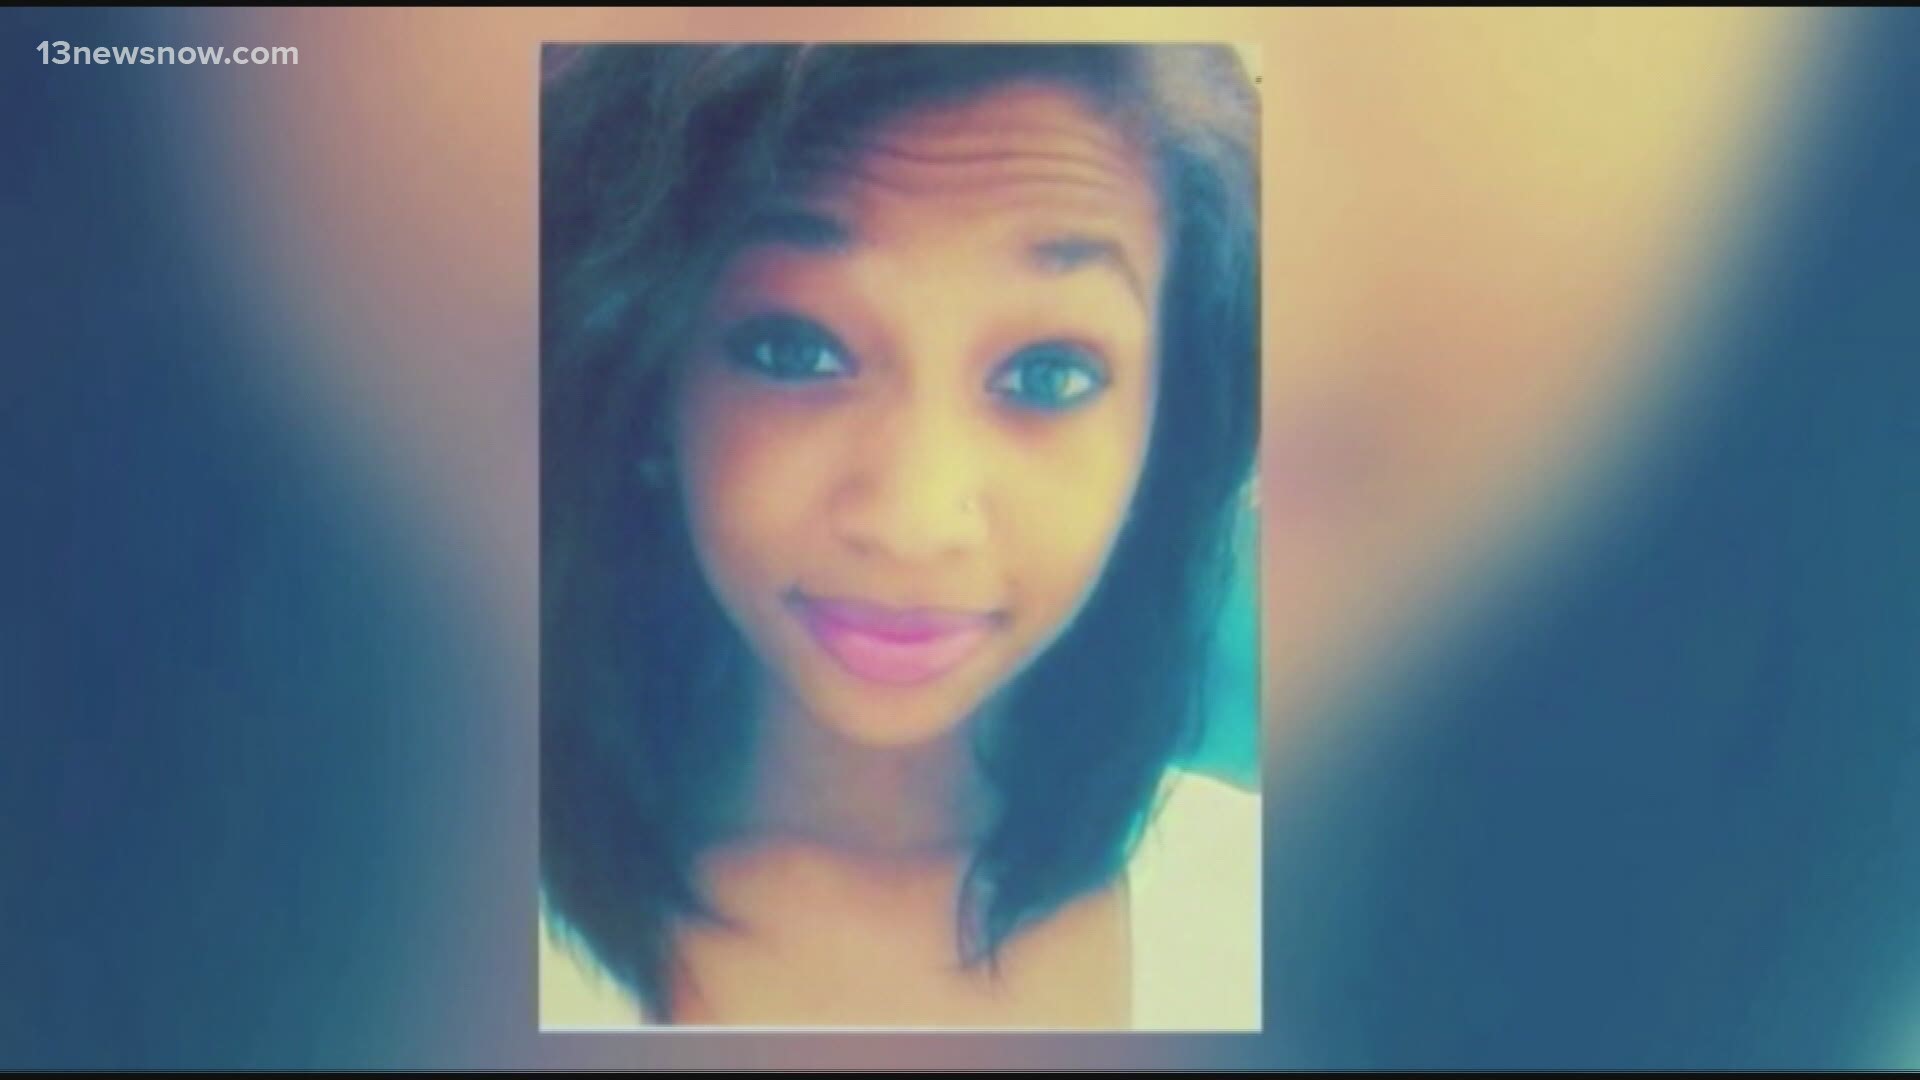 Alexis Murphy was 17 years old when she disappeared. Investigators said she was kidnapped and murdered. Her remains were on private property in western Virginia.